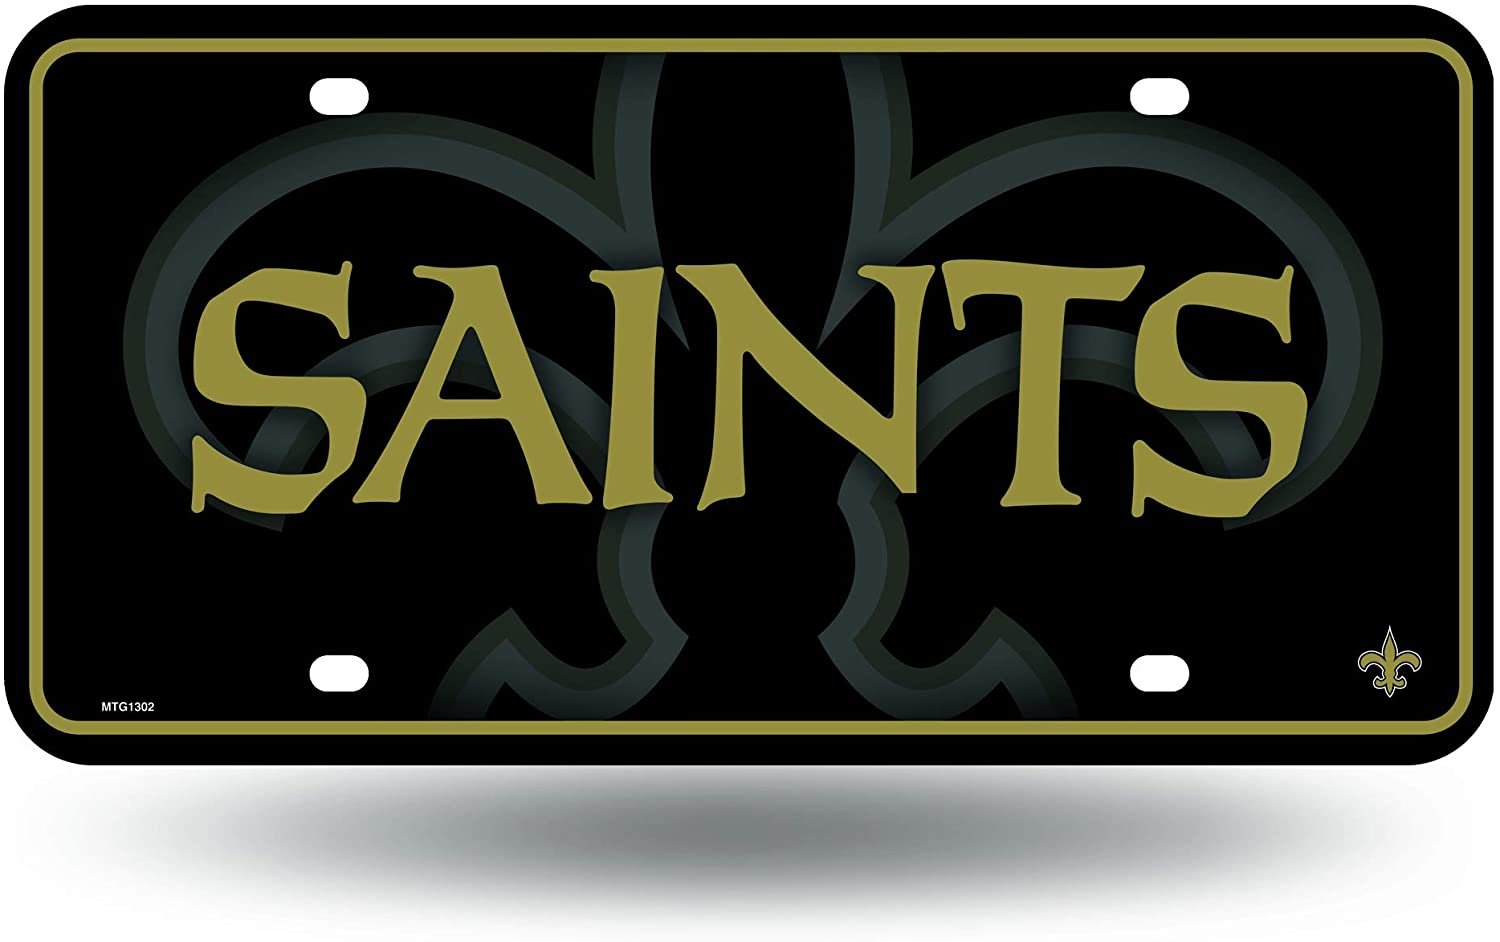 New Orleans Saints Metal Auto Tag License Plate, Team Name Design, 6x12 Inch